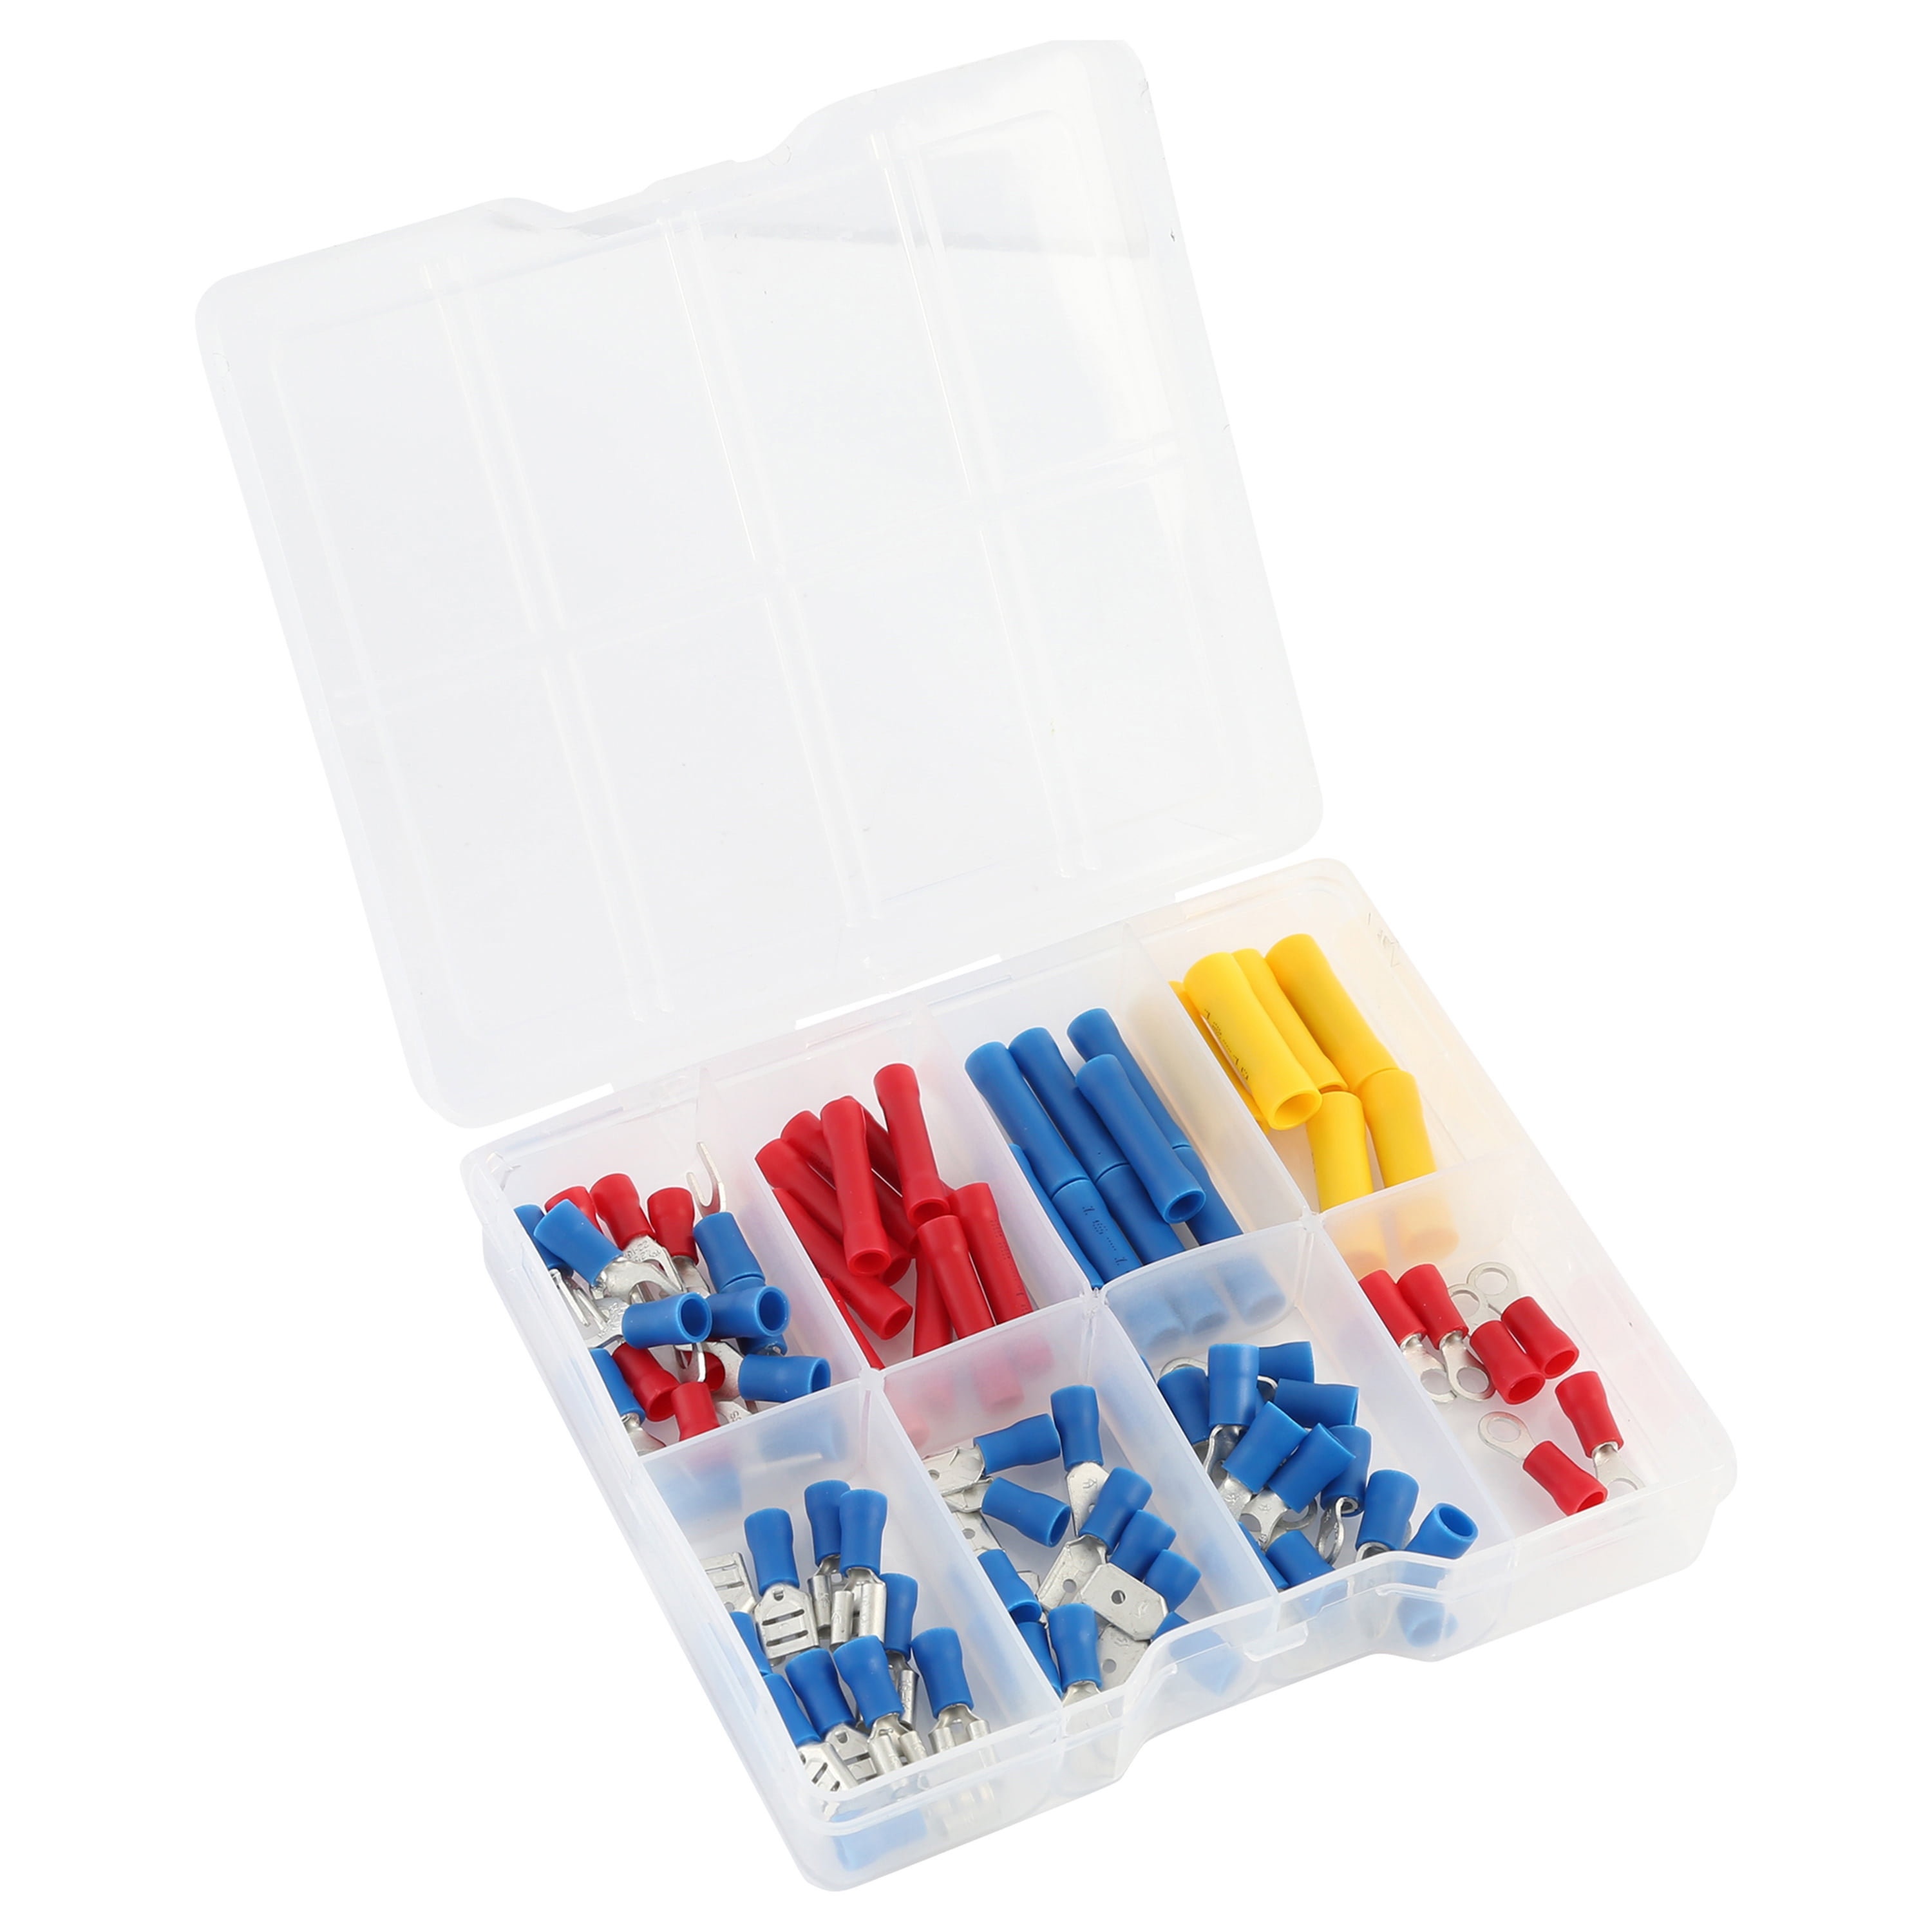 Hyper Tough 80-Piece Electrical Connector Assortment with Storage Case